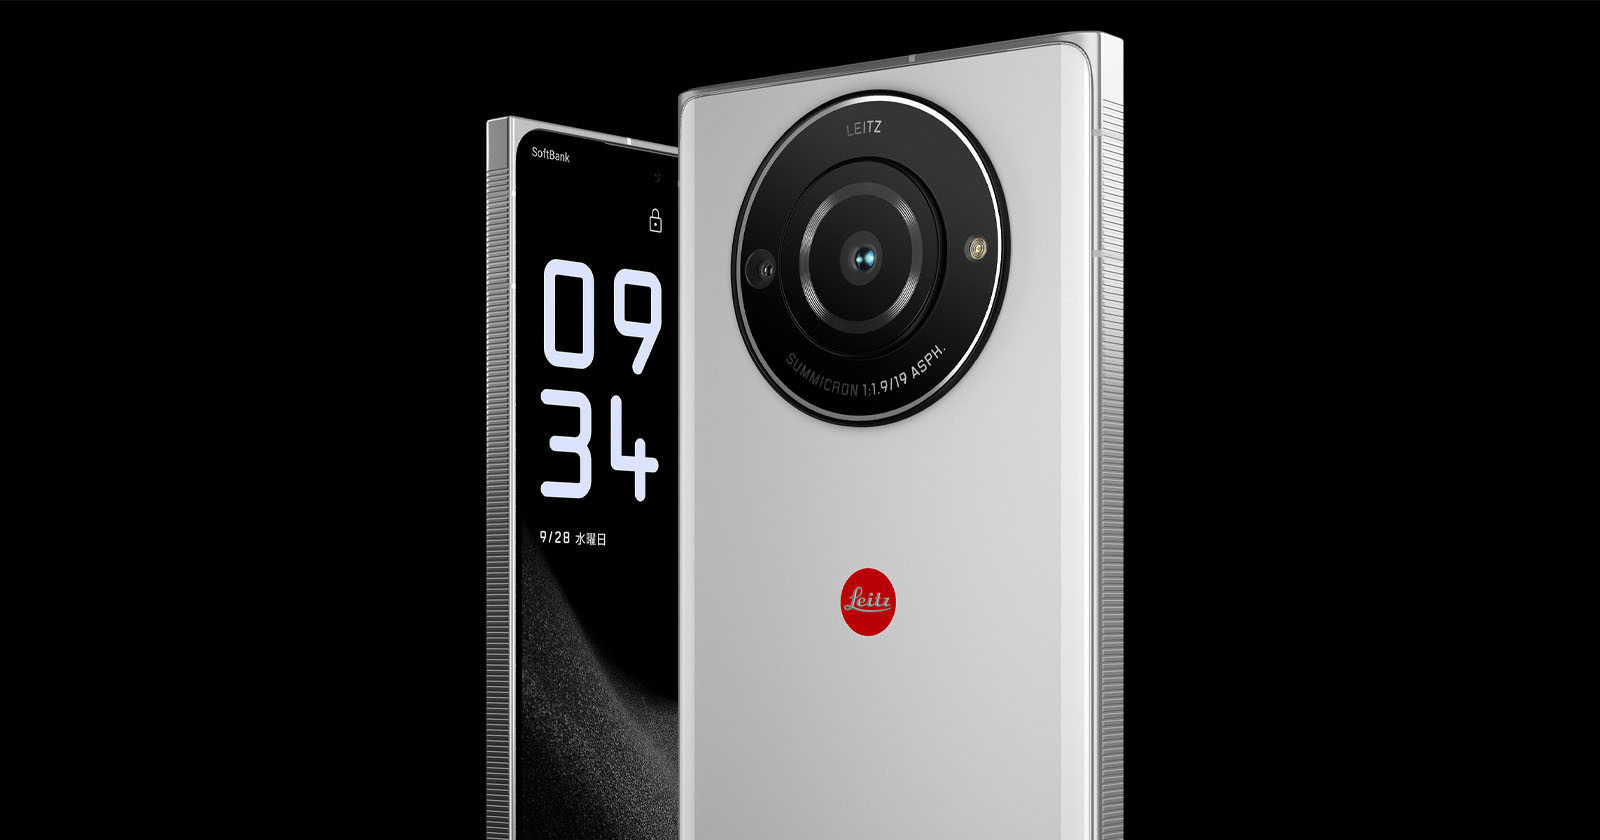 Leicas 47.2MP Leitz Phone 2 Has Largest Sensor Ever in a Phone